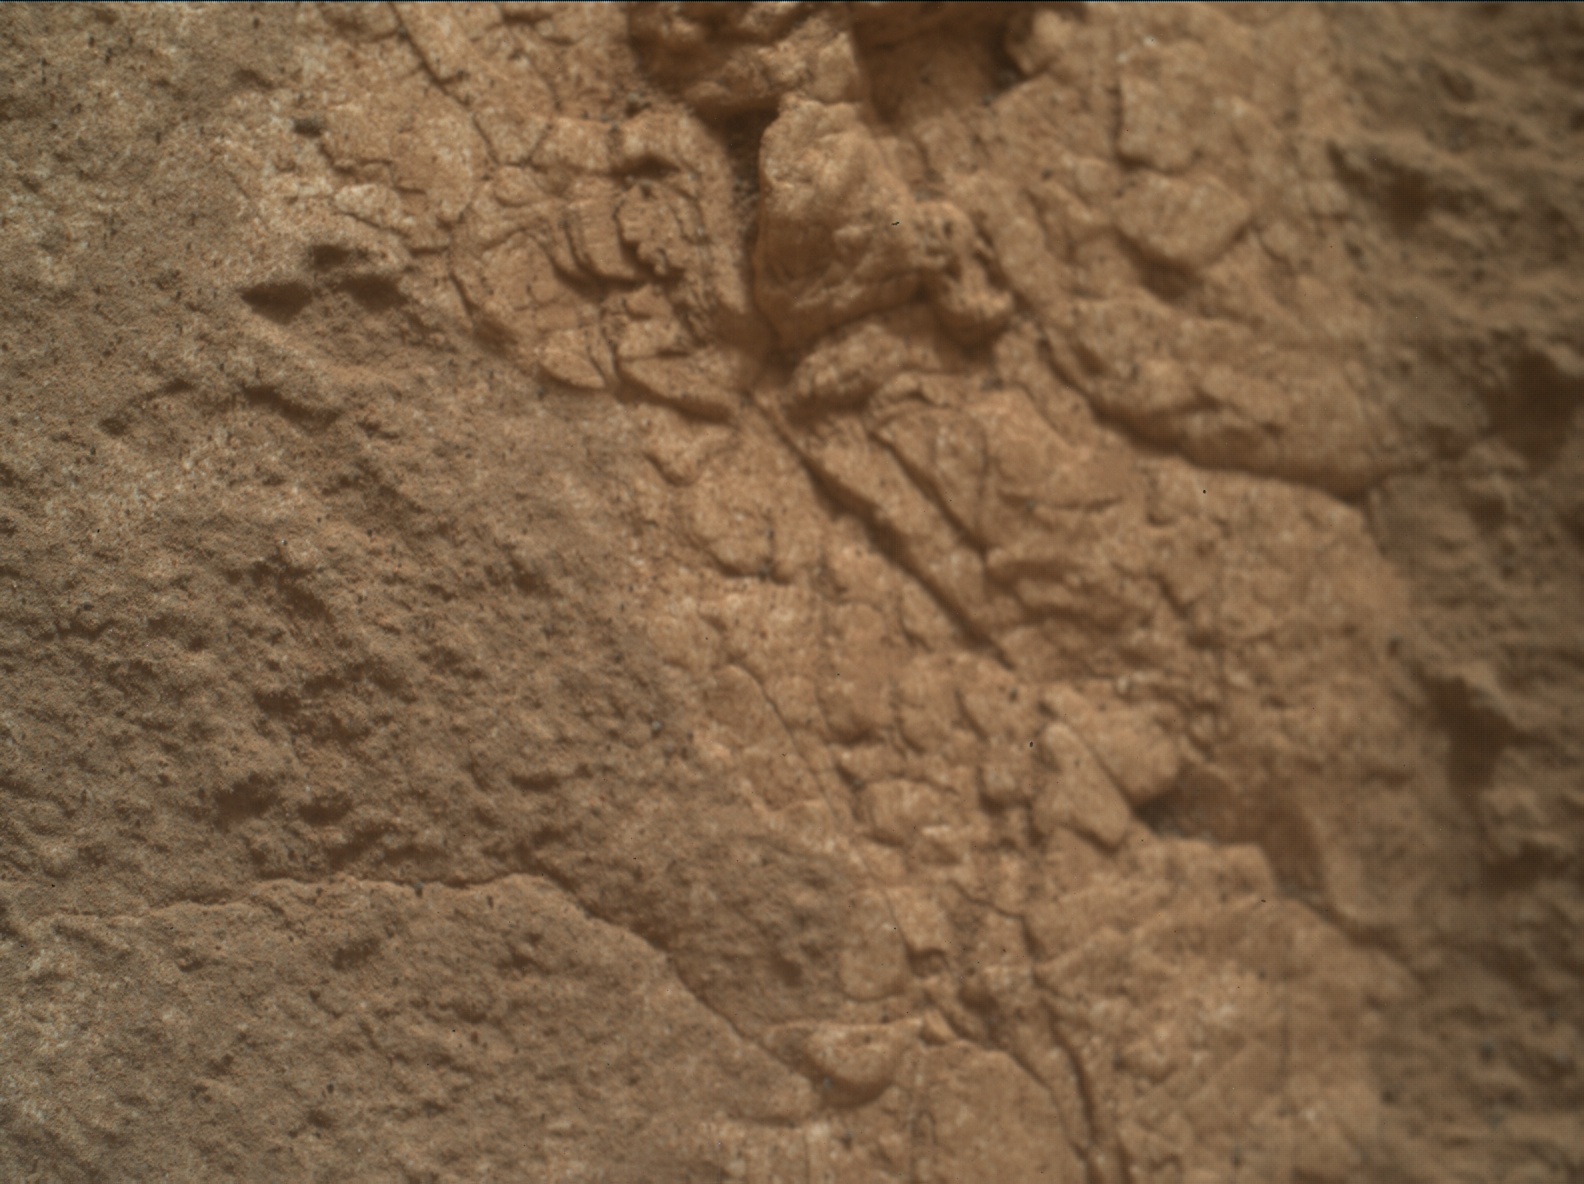 Nasa's Mars rover Curiosity acquired this image using its Mars Hand Lens Imager (MAHLI) on Sol 3459